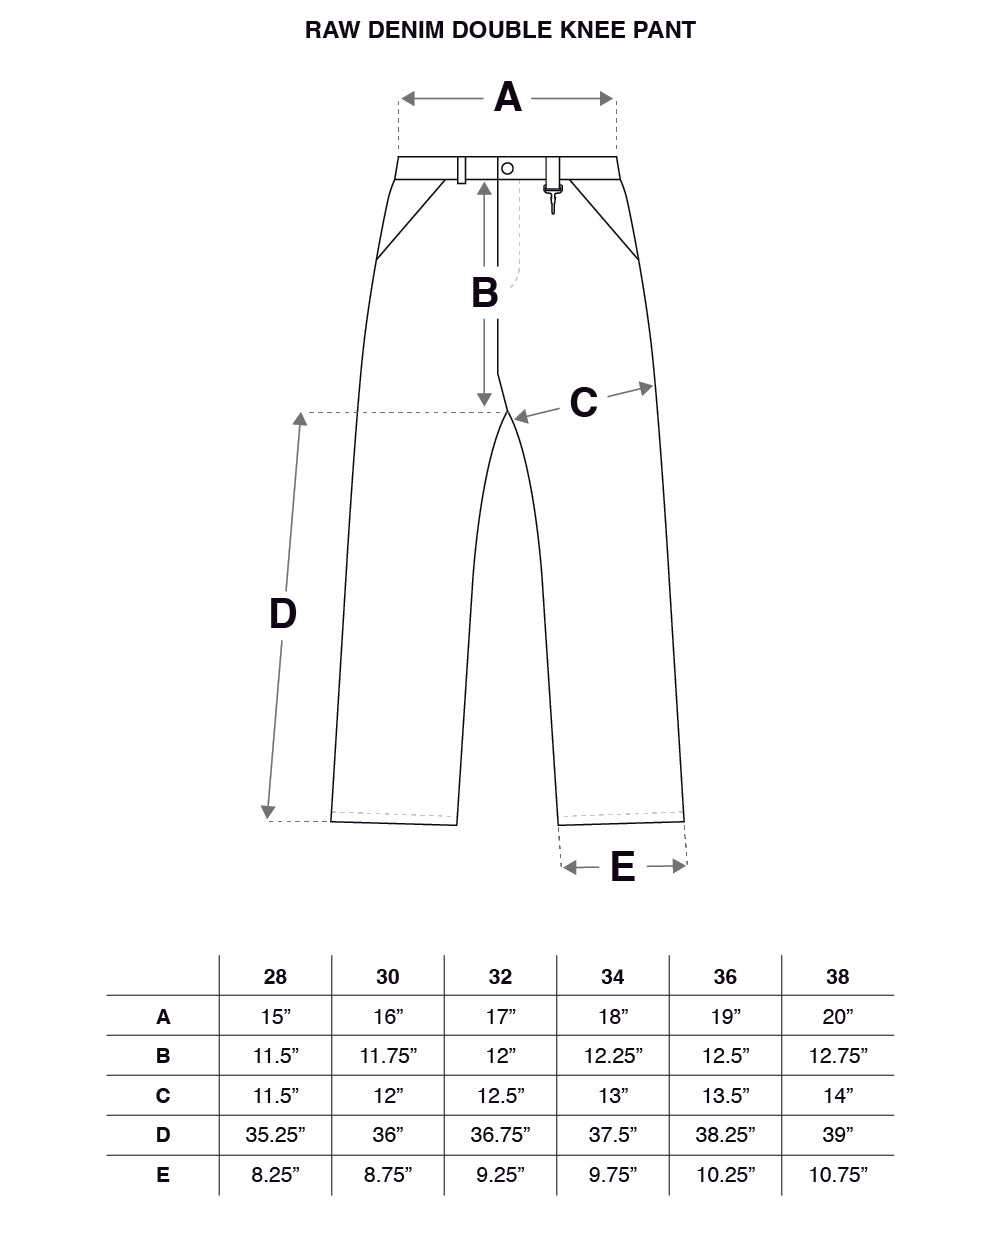 Raw Denim Double Knee Pant in Indigo Size Guide